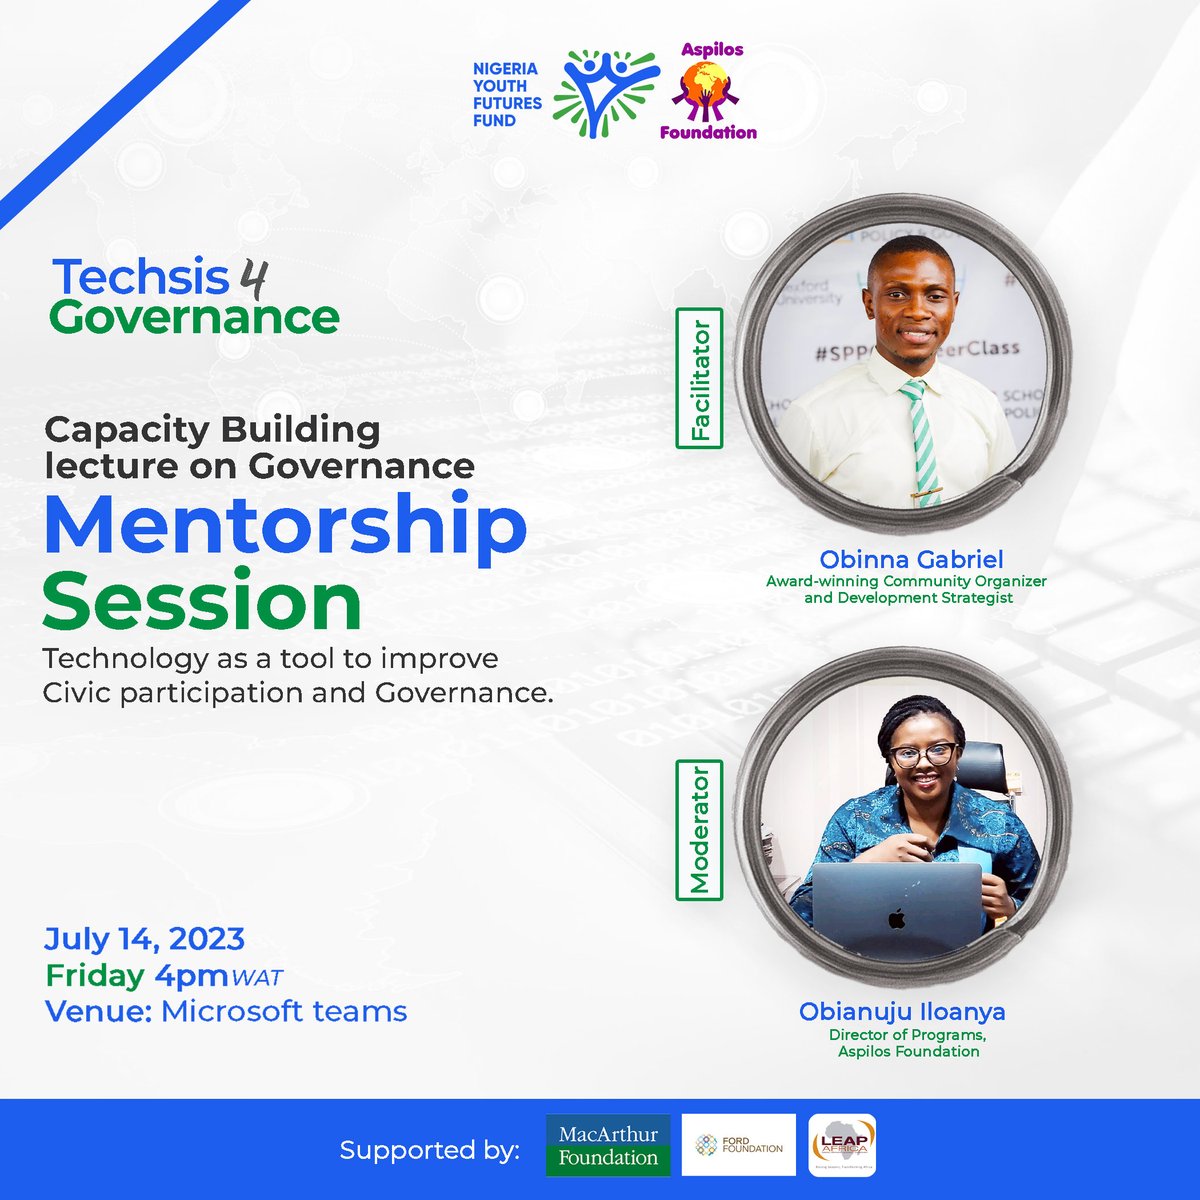 This weekend on our TechSis for Governance training platform, we would be having two exceptional experts mentor participants on the transformative influence of technology on shaping the future of governance.
#thenigeriawewant
#Tech4Gov #DigitalGovernance